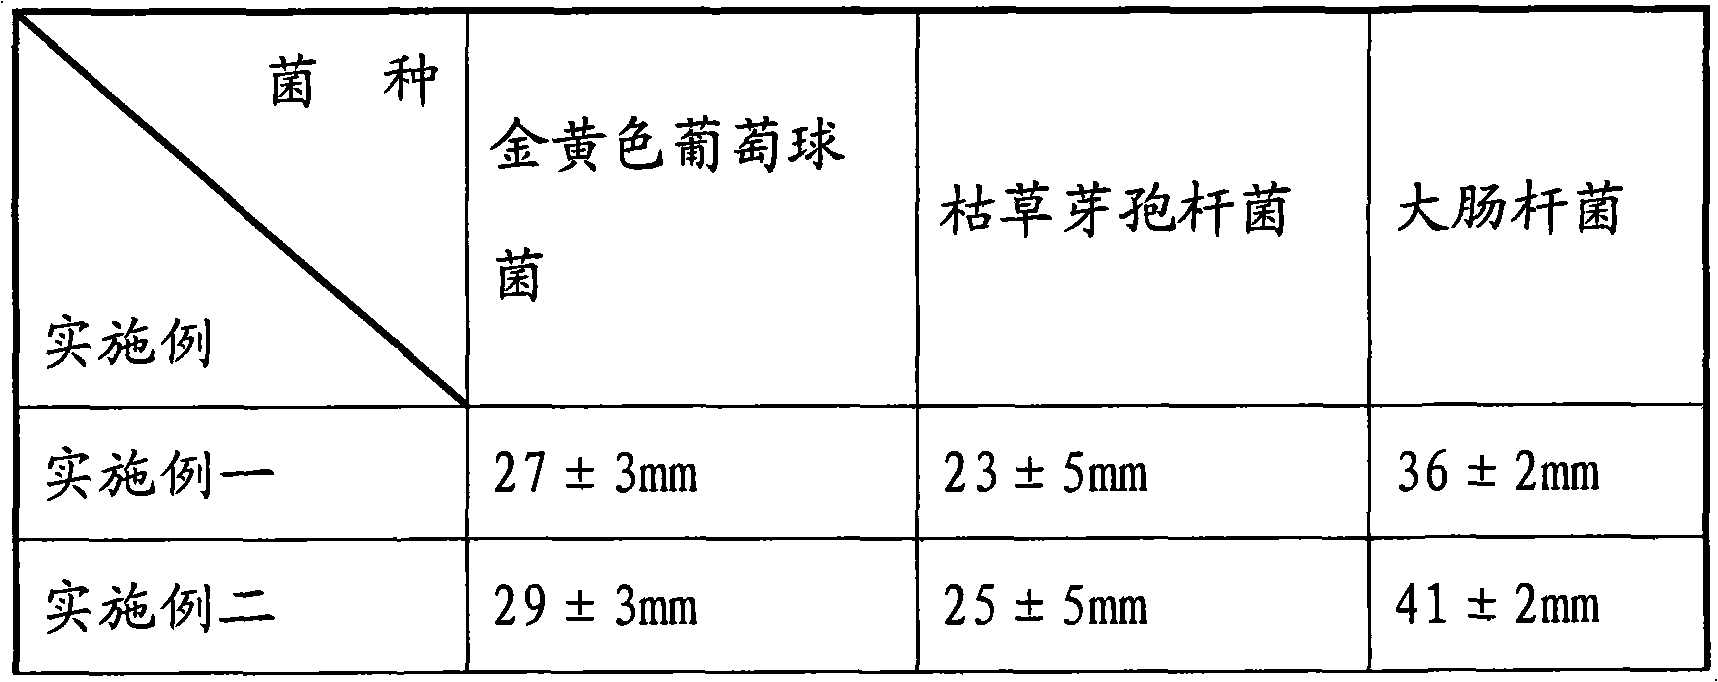 Method for extracting natural preservative from bamboo leaves